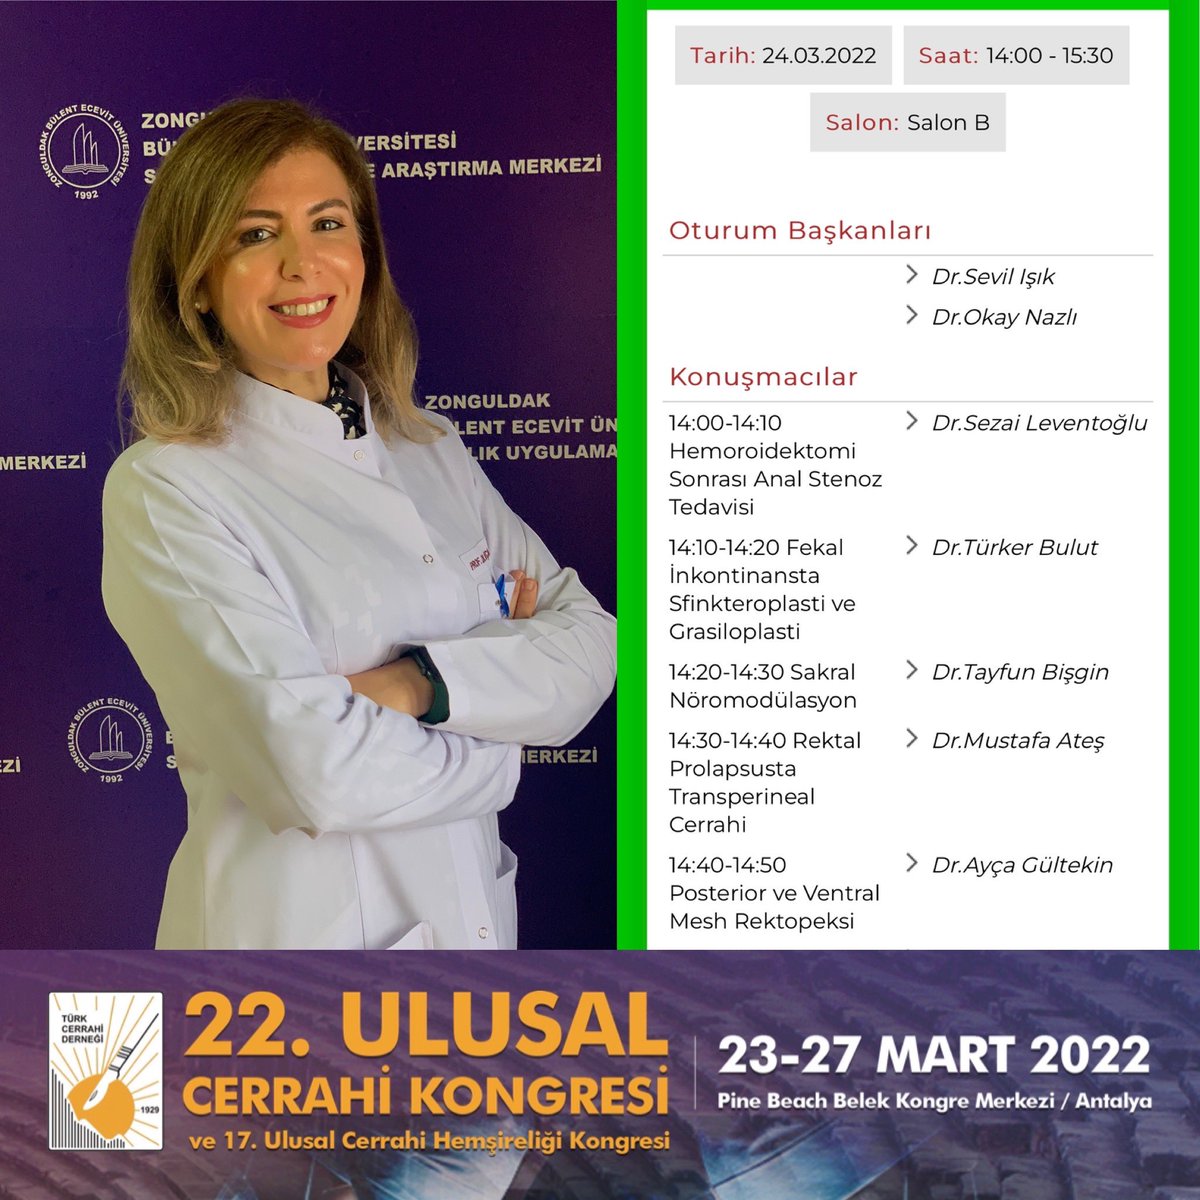 #uck2022 🇹🇷22nd National Congress of Surgery starts today🇹🇷Tomorrow I will show you how I perform laparoscopic ventral mesh rectopexy! PS: The most important step is patient selection!!
@TKRCD_ @turkdiscolrect @turkcerrahi @SoMe4Proctology @me4_so